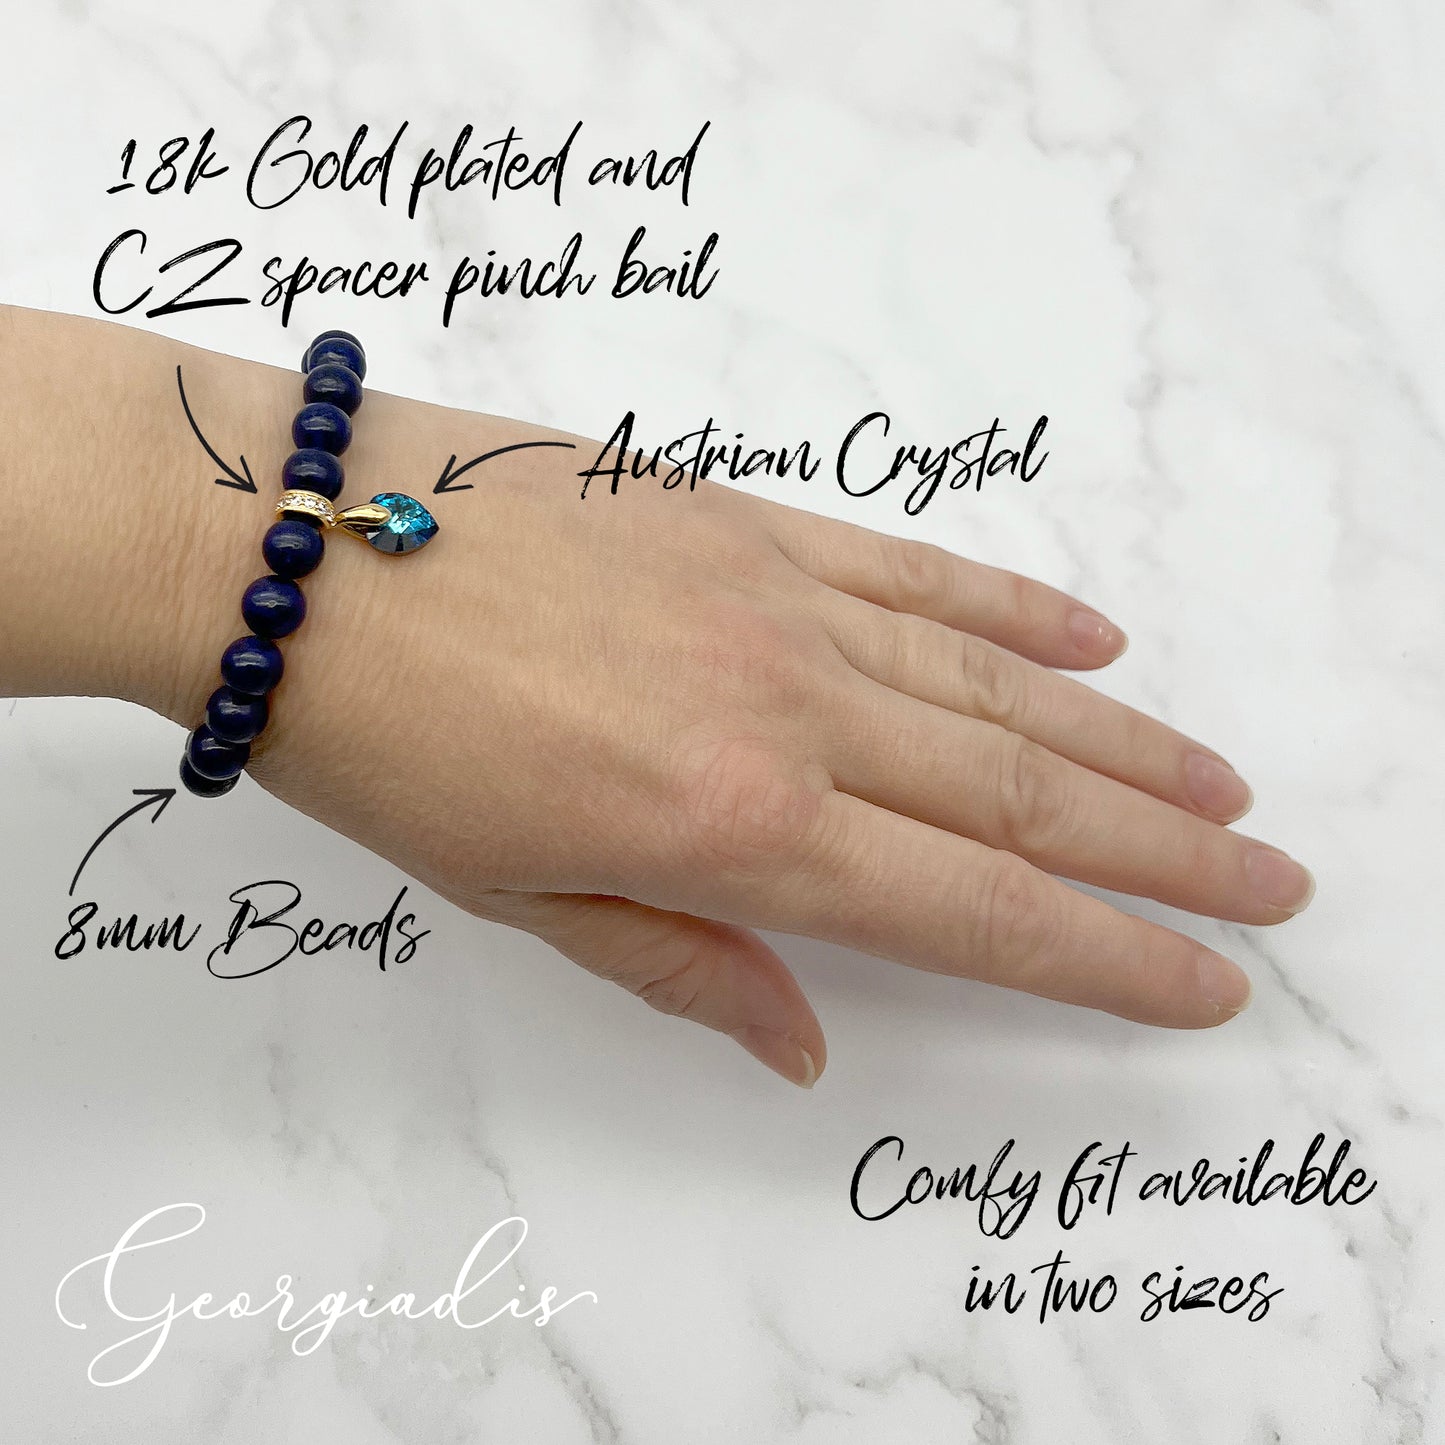 8mm Lapis Lazuli Gemstone Bracelet with Austrian Crystal Heart Charm, 18K Gold Plating, Healing Stone, Promotes Self-confidence, Intuition.